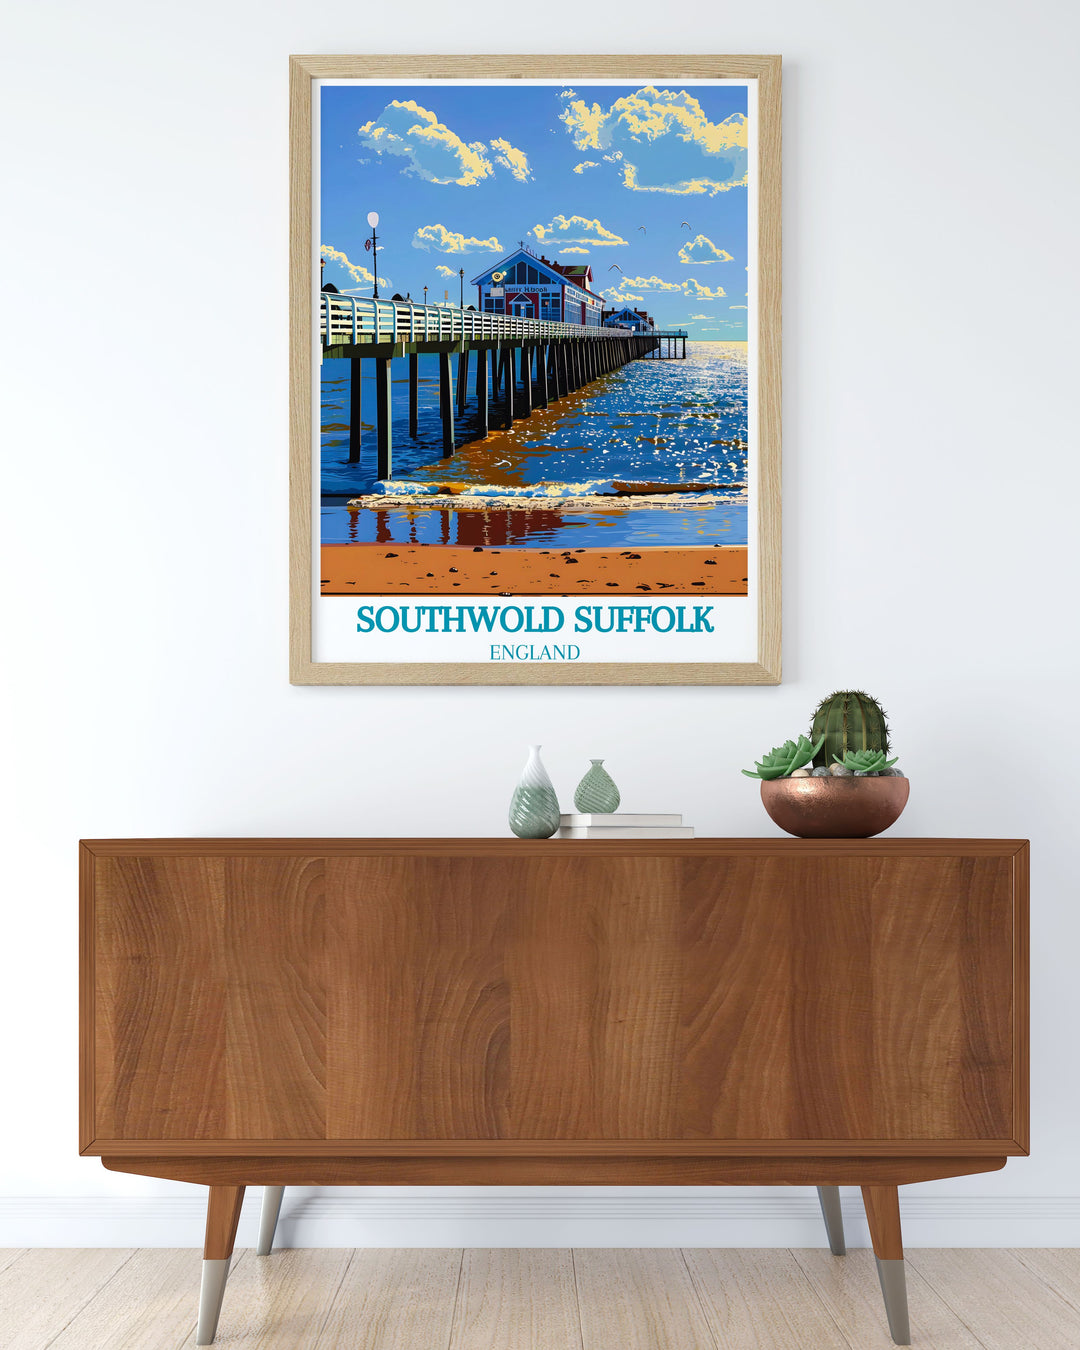 Capture the essence of Southwolds seaside charm with this art print, highlighting the traditional pier and the surrounding coastal beauty.